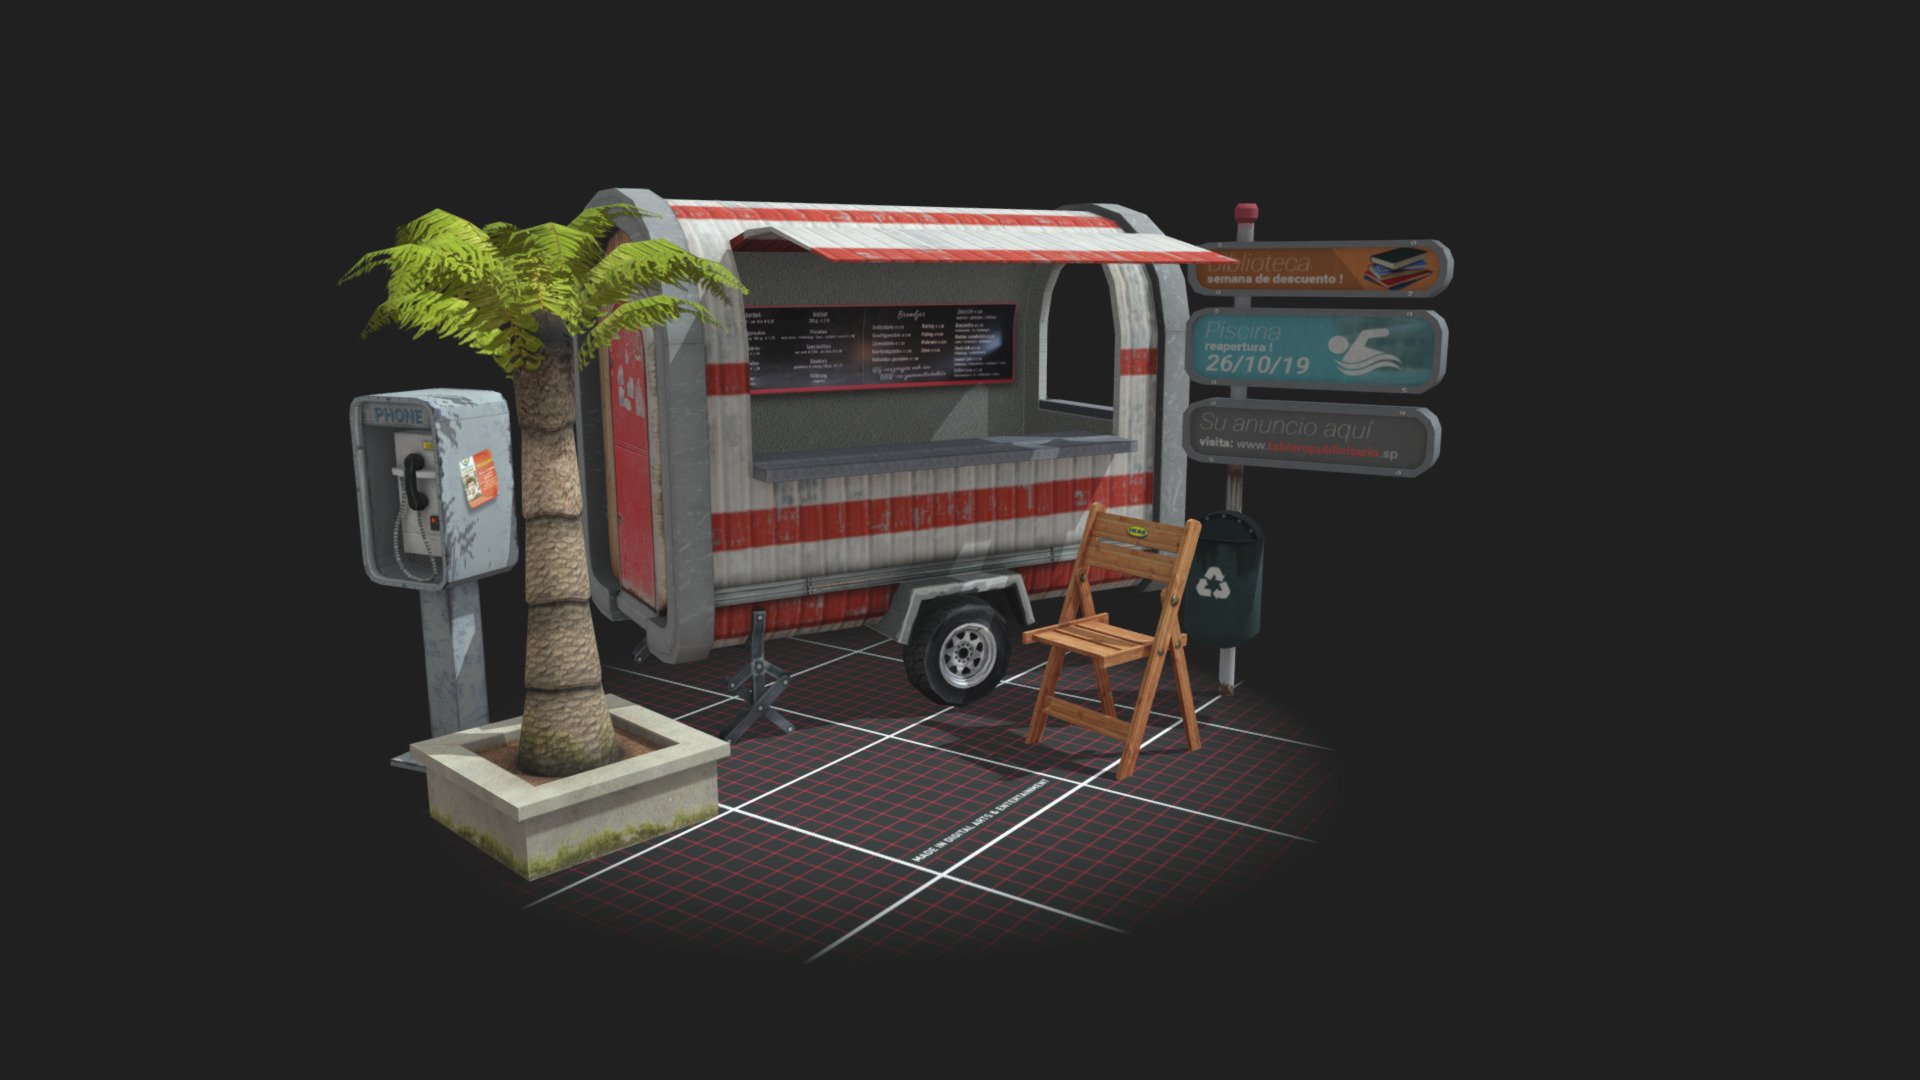 5 Props fiting the upcoming city scene. (Assignment at DAE)
- foodtruck
- public phone
- palm tree
- chair
- street sign(s) - Props Scene (5 city-related-props)(1DAE06) - 3D model by Bob.Joostens 3d model